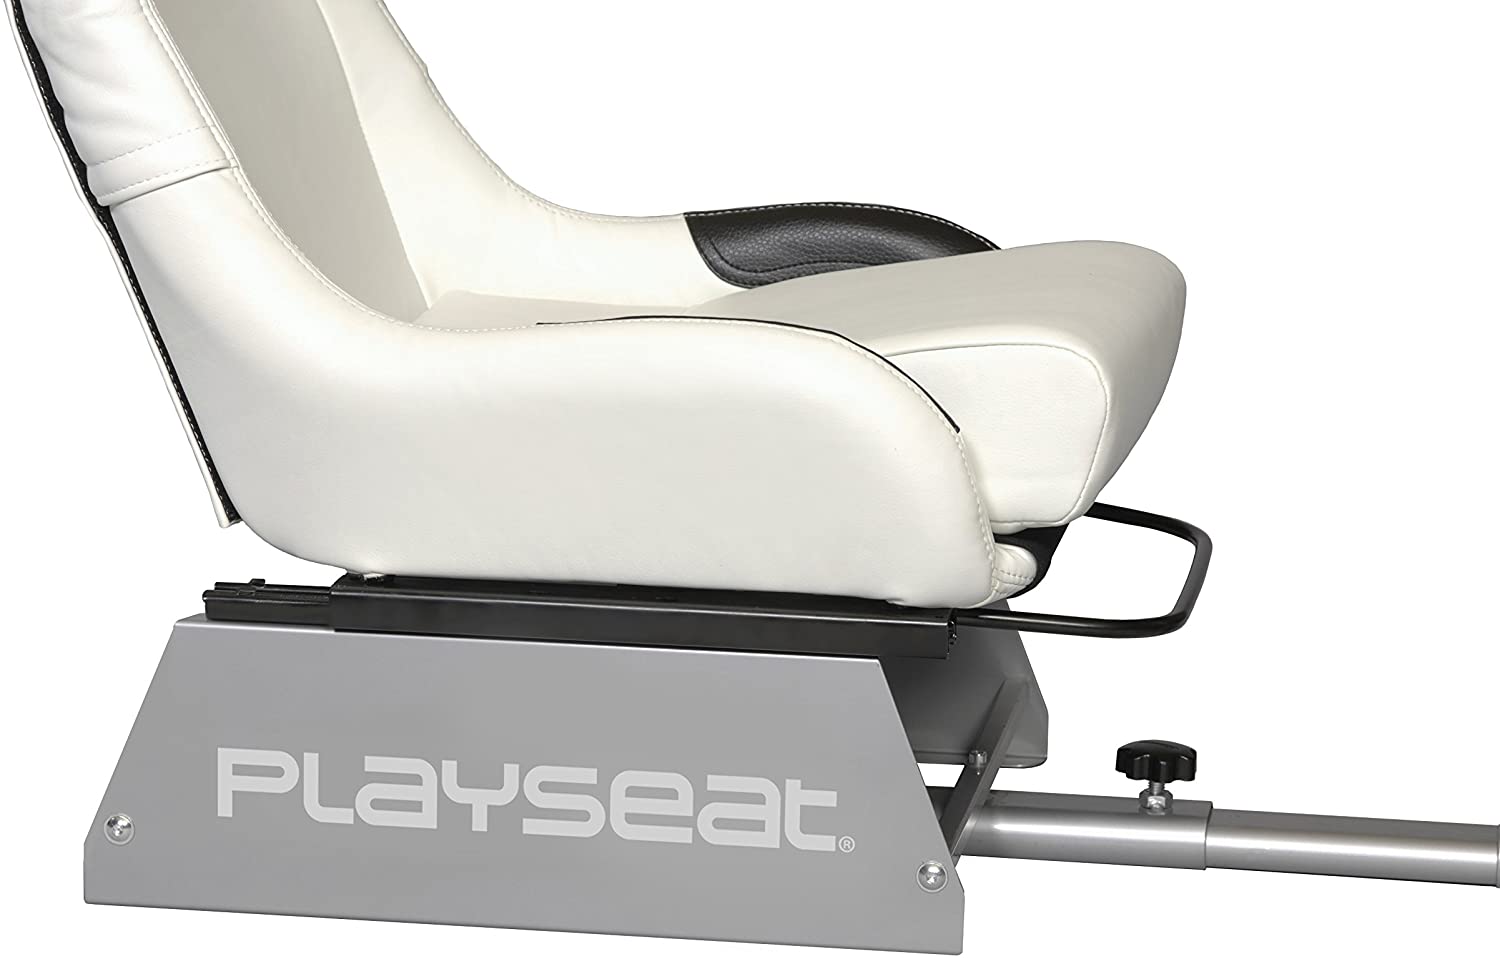 Playseat R.AC.00072 Seat Slider Racing Video Game Chair Accessory - Refurbished